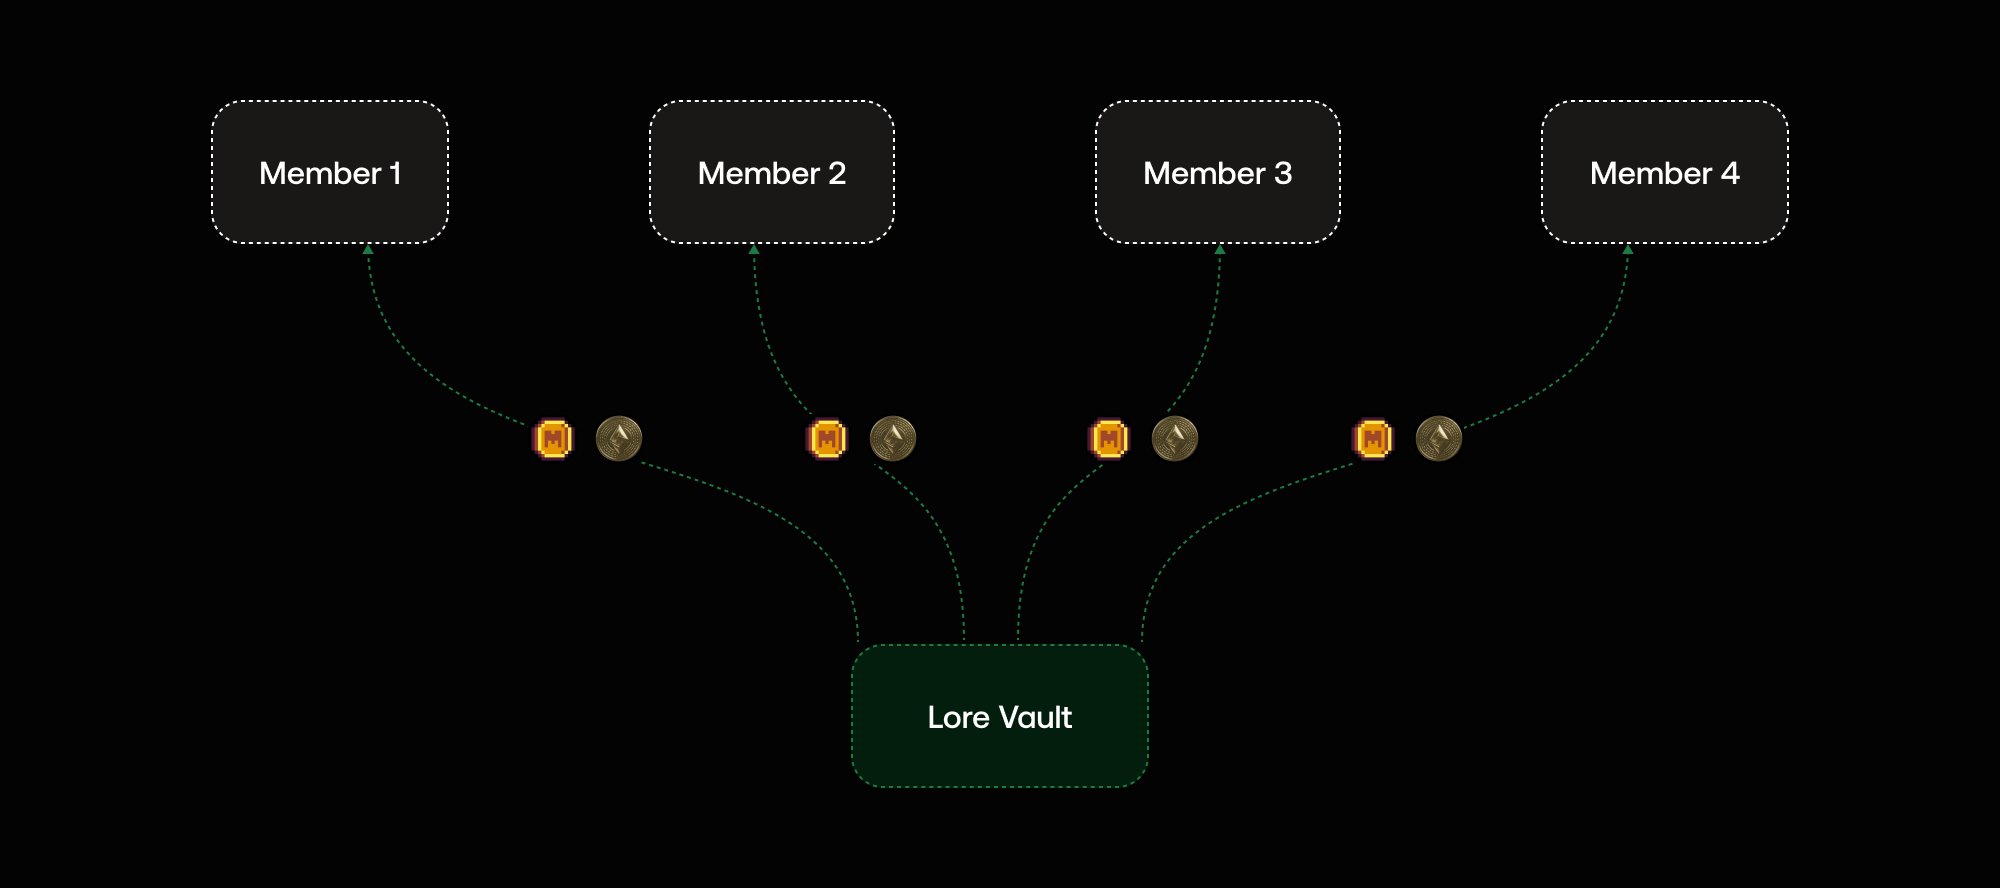 Distribute rewards to all members based on their ownership stake